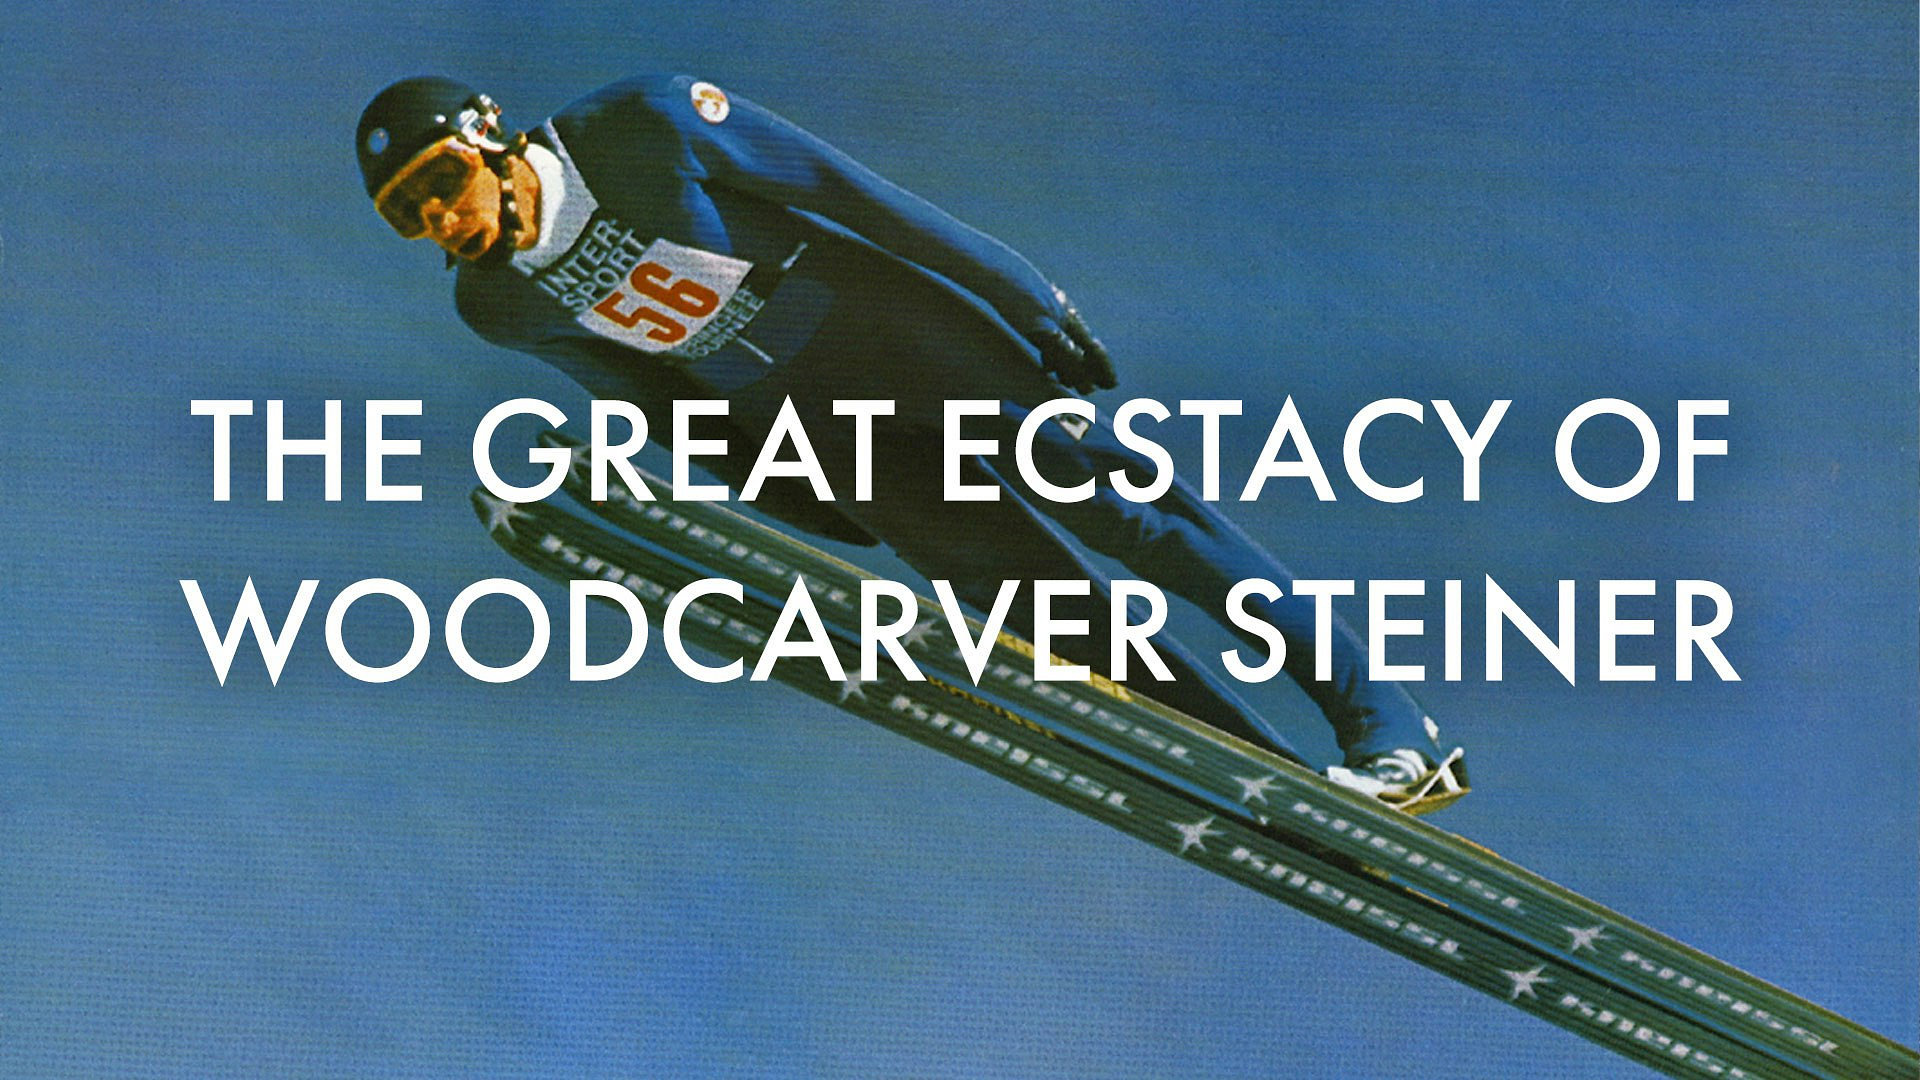 The Great Ecstasy of Woodcarver Steiner